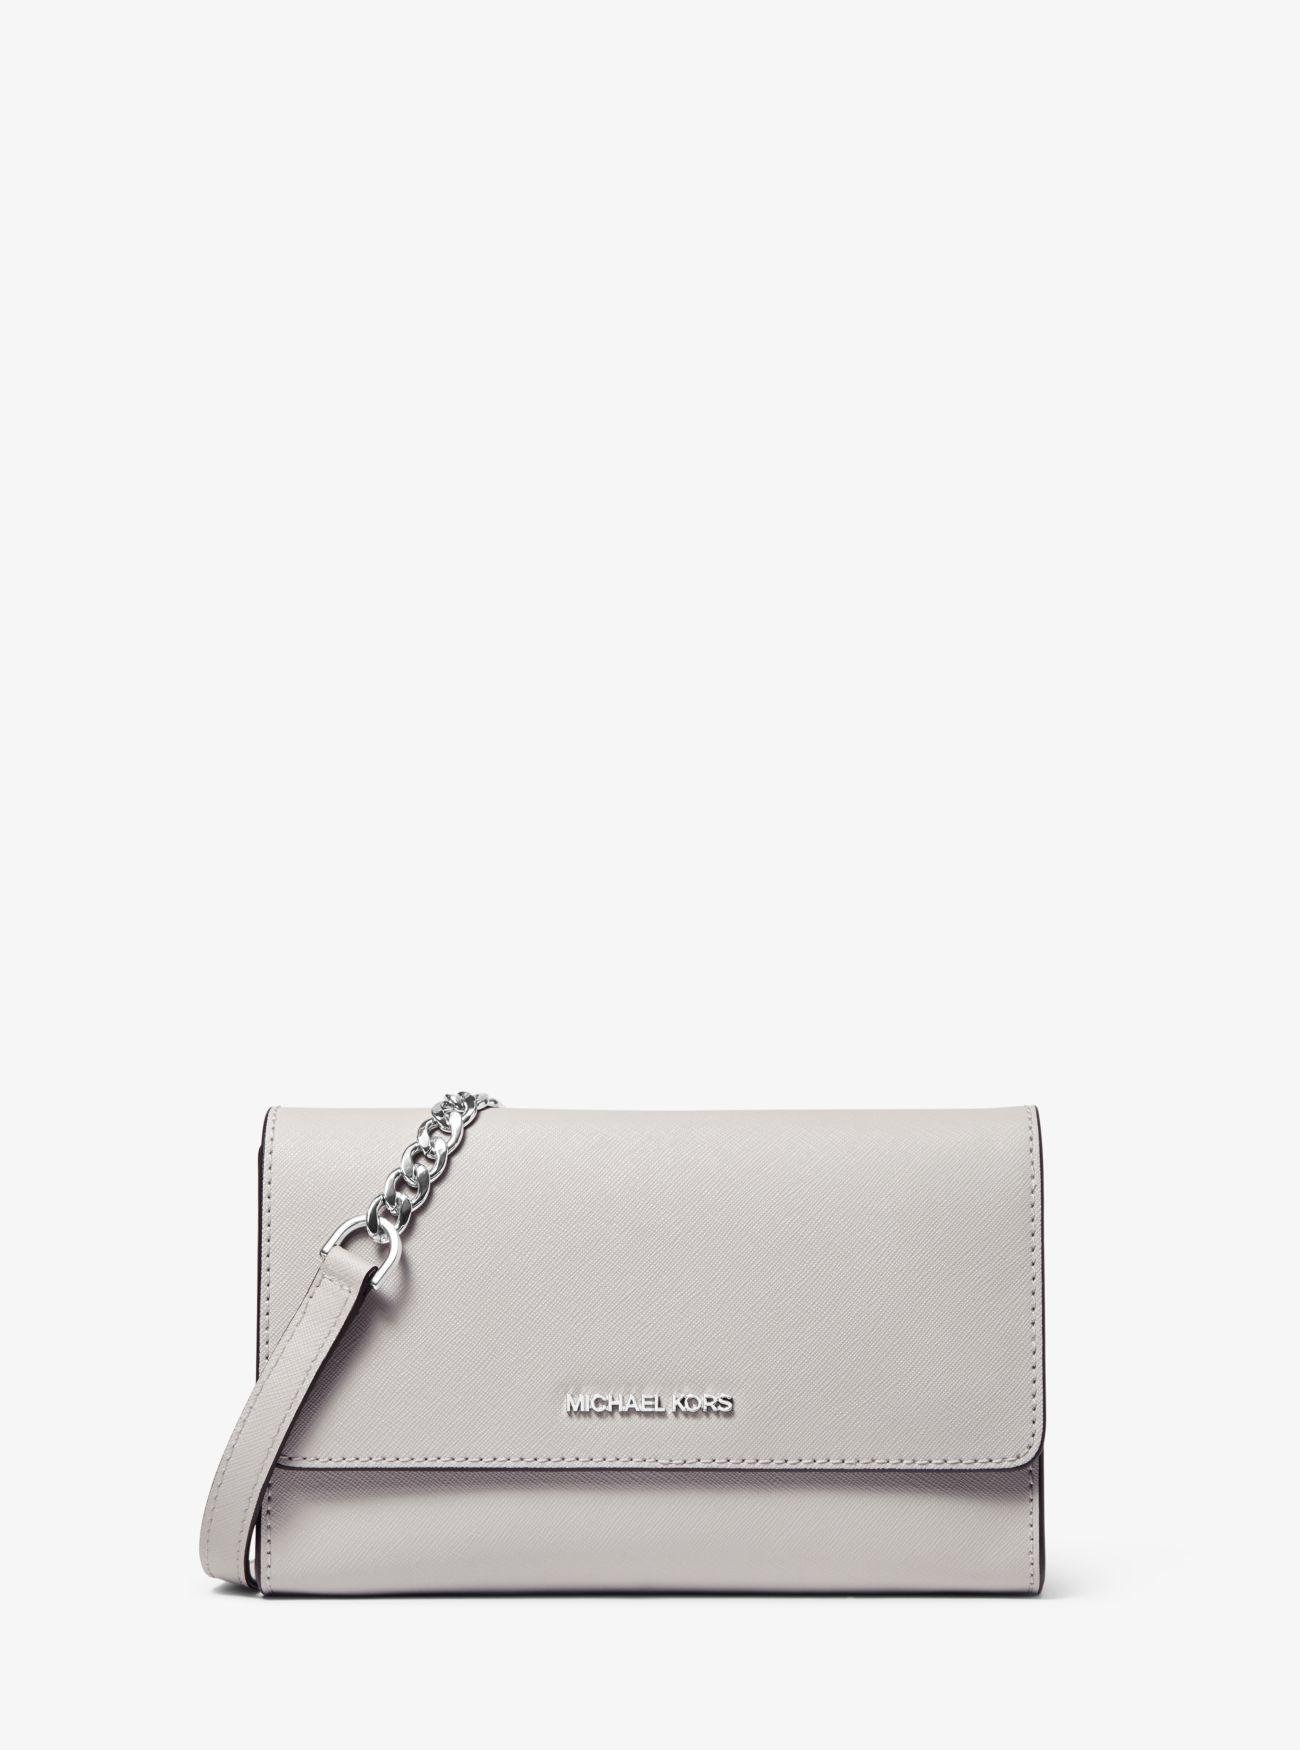 avoid Stable scientist Michael Kors Jet Set Small Saffiano Leather Convertible Crossbody Bag in  Grey (Gray) | Lyst